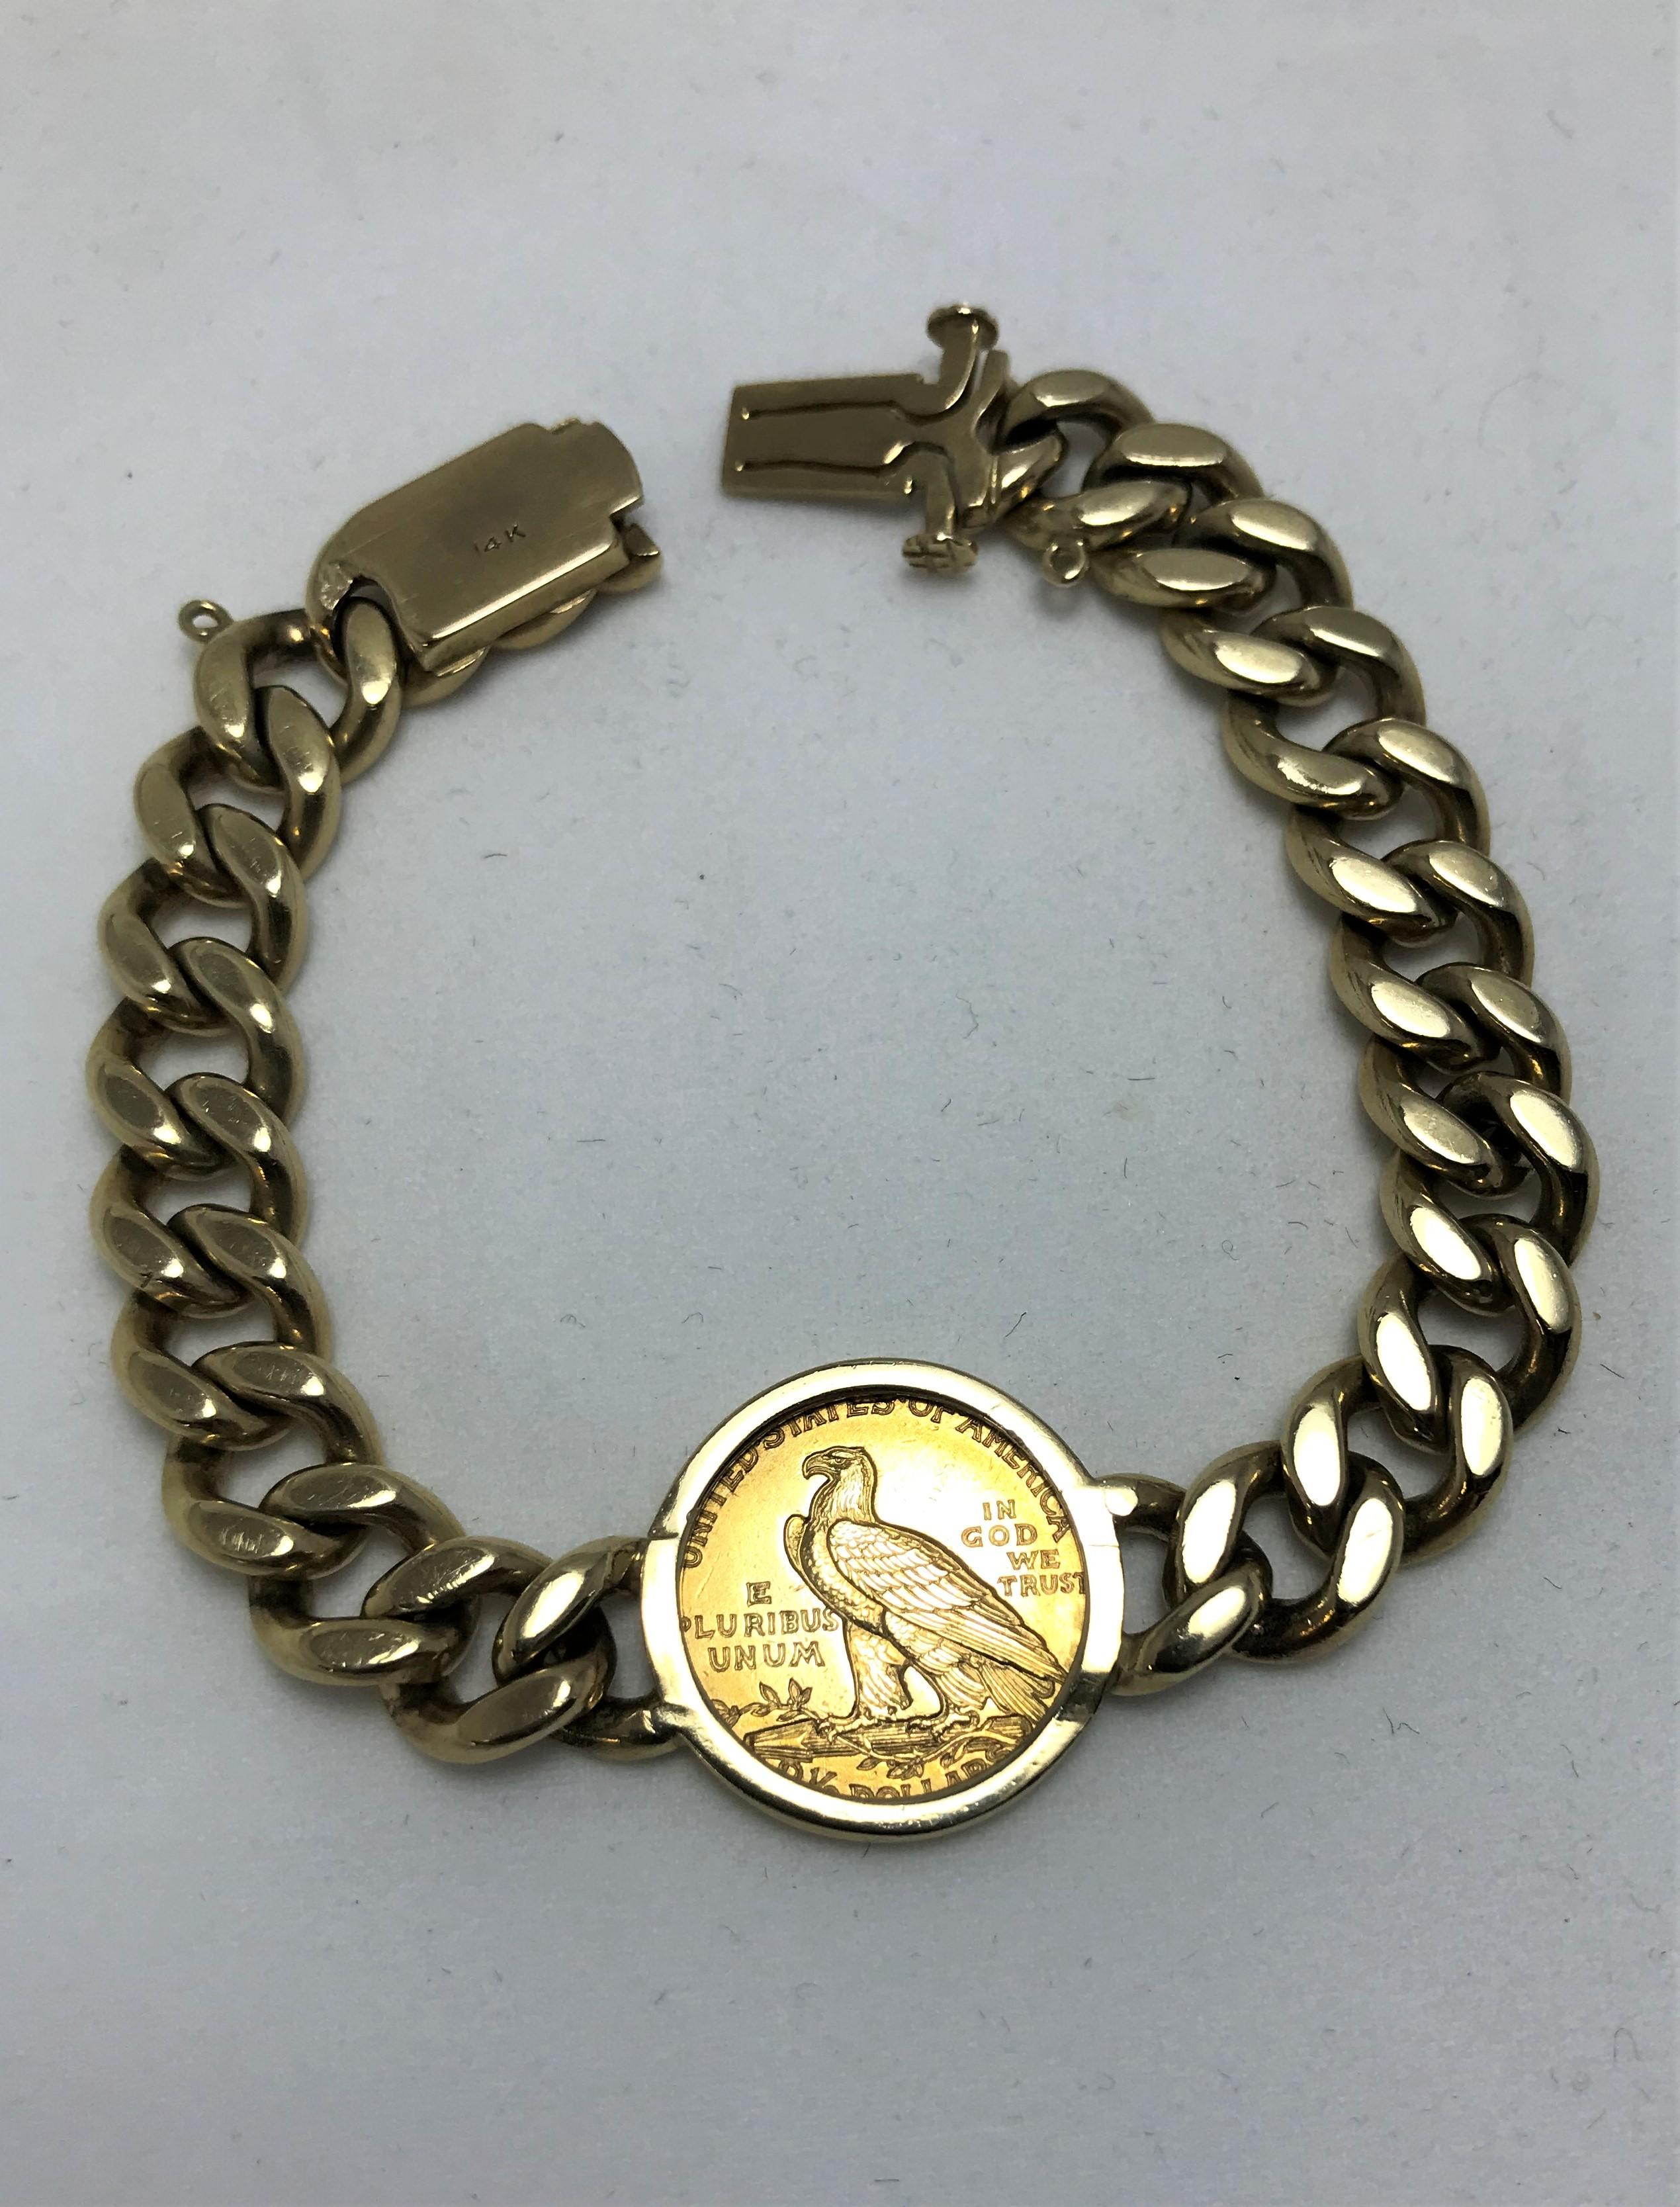 1927 Indian Head Quarter Eagle Coin on Curb Link Chain Bracelet can be worn either side up
Indian Head Quarter Eagle coin says 